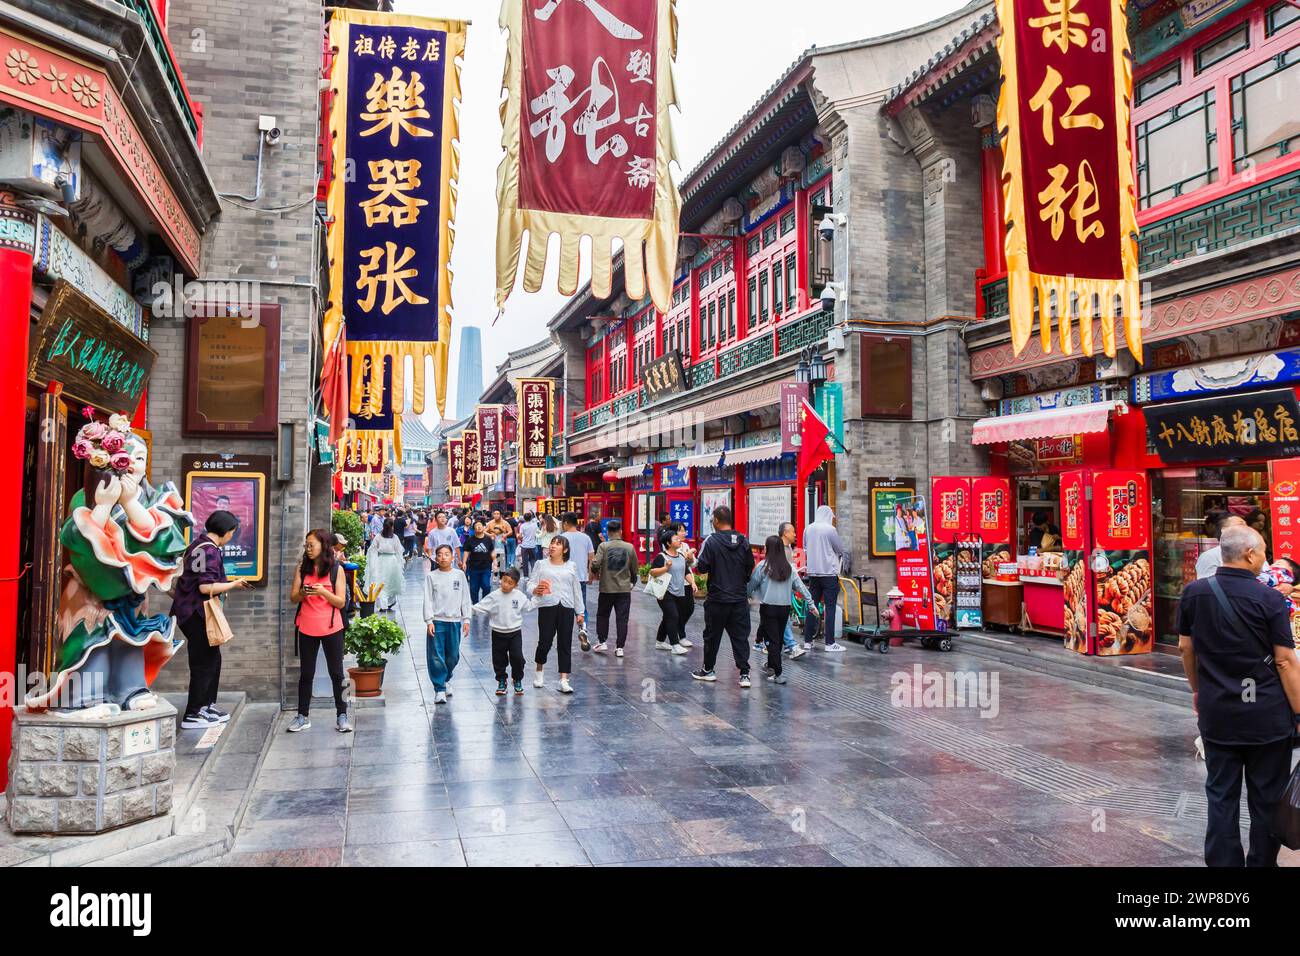 People enjoying the shops in the Ancient Cultural Street of Tianjin, China Stock Photo